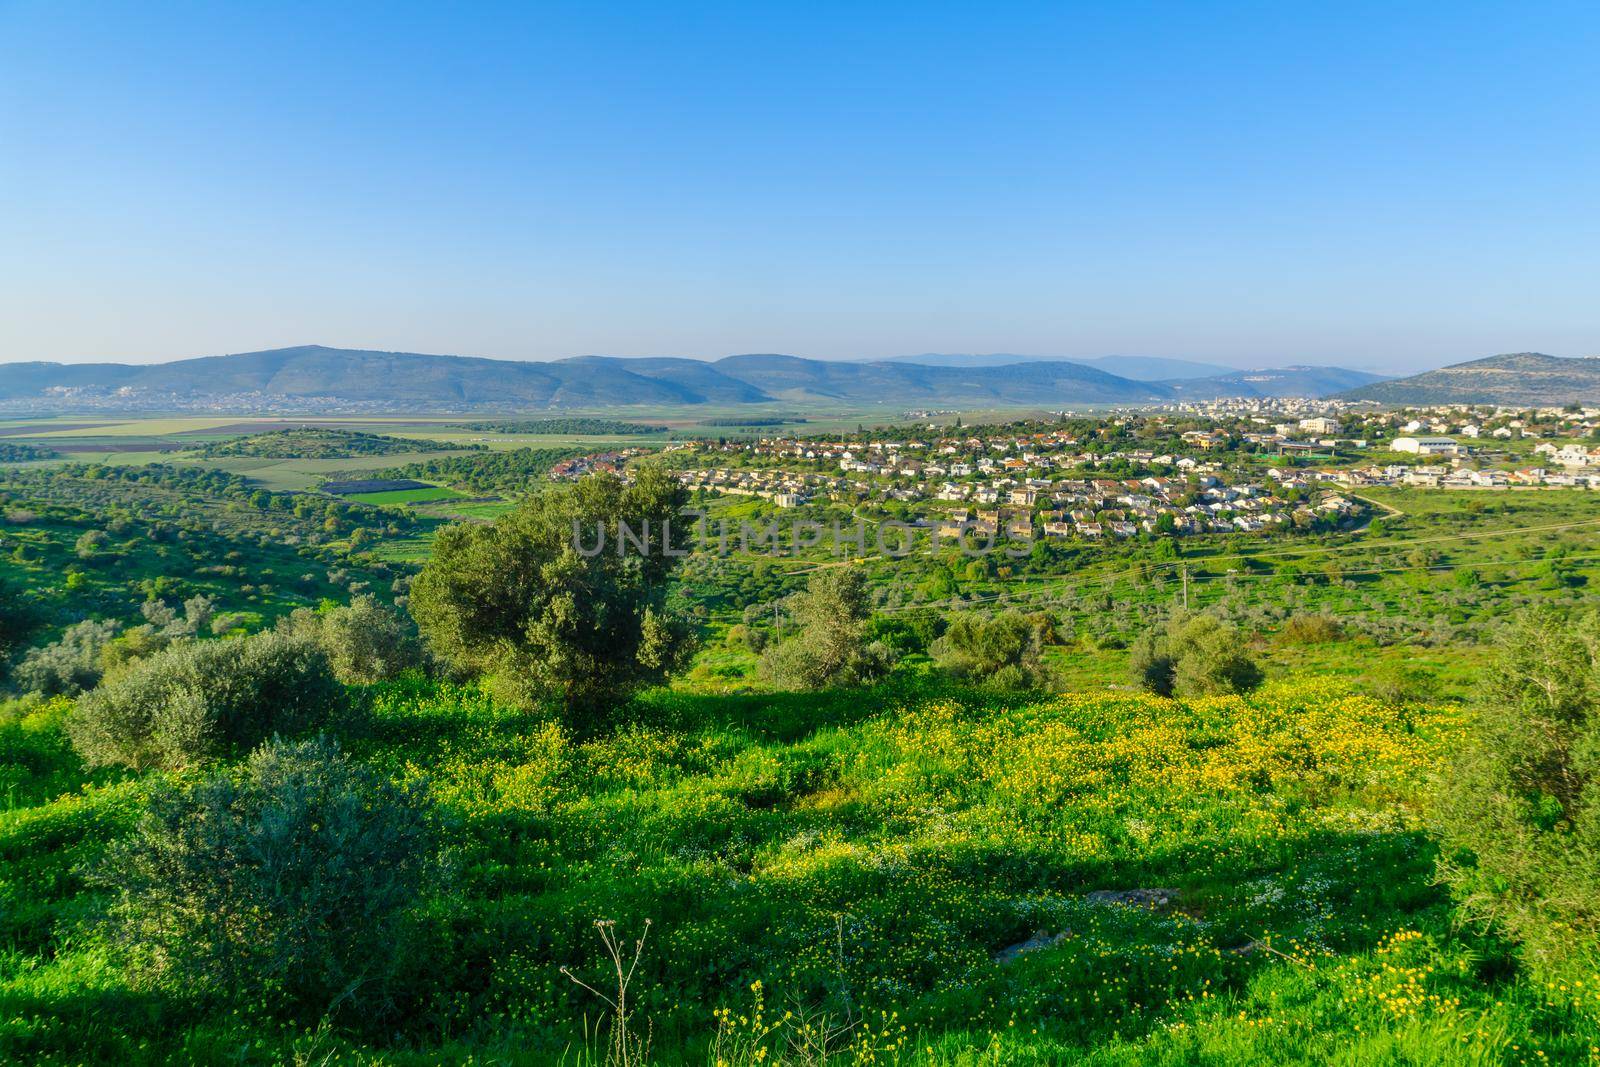 View of landscape and countryside of the western Lower Galilee, from Tzipori, Northern Israel